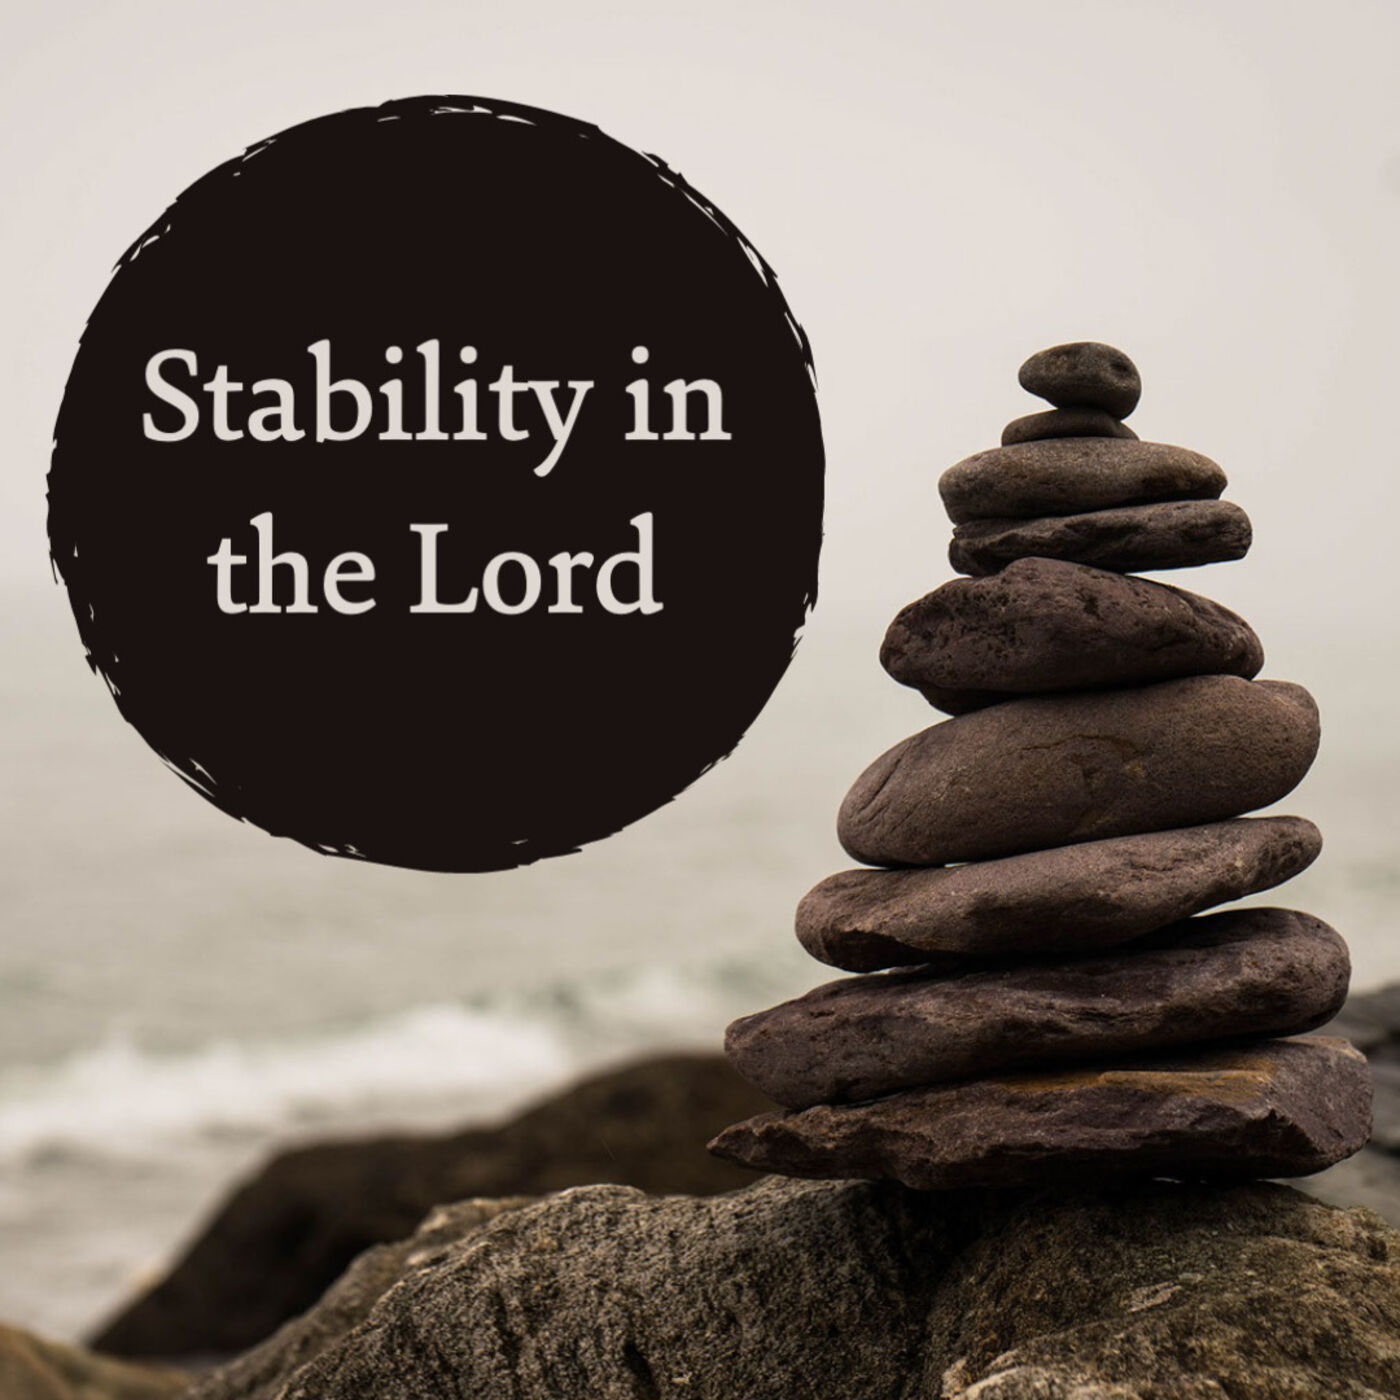 Stability in the Lord